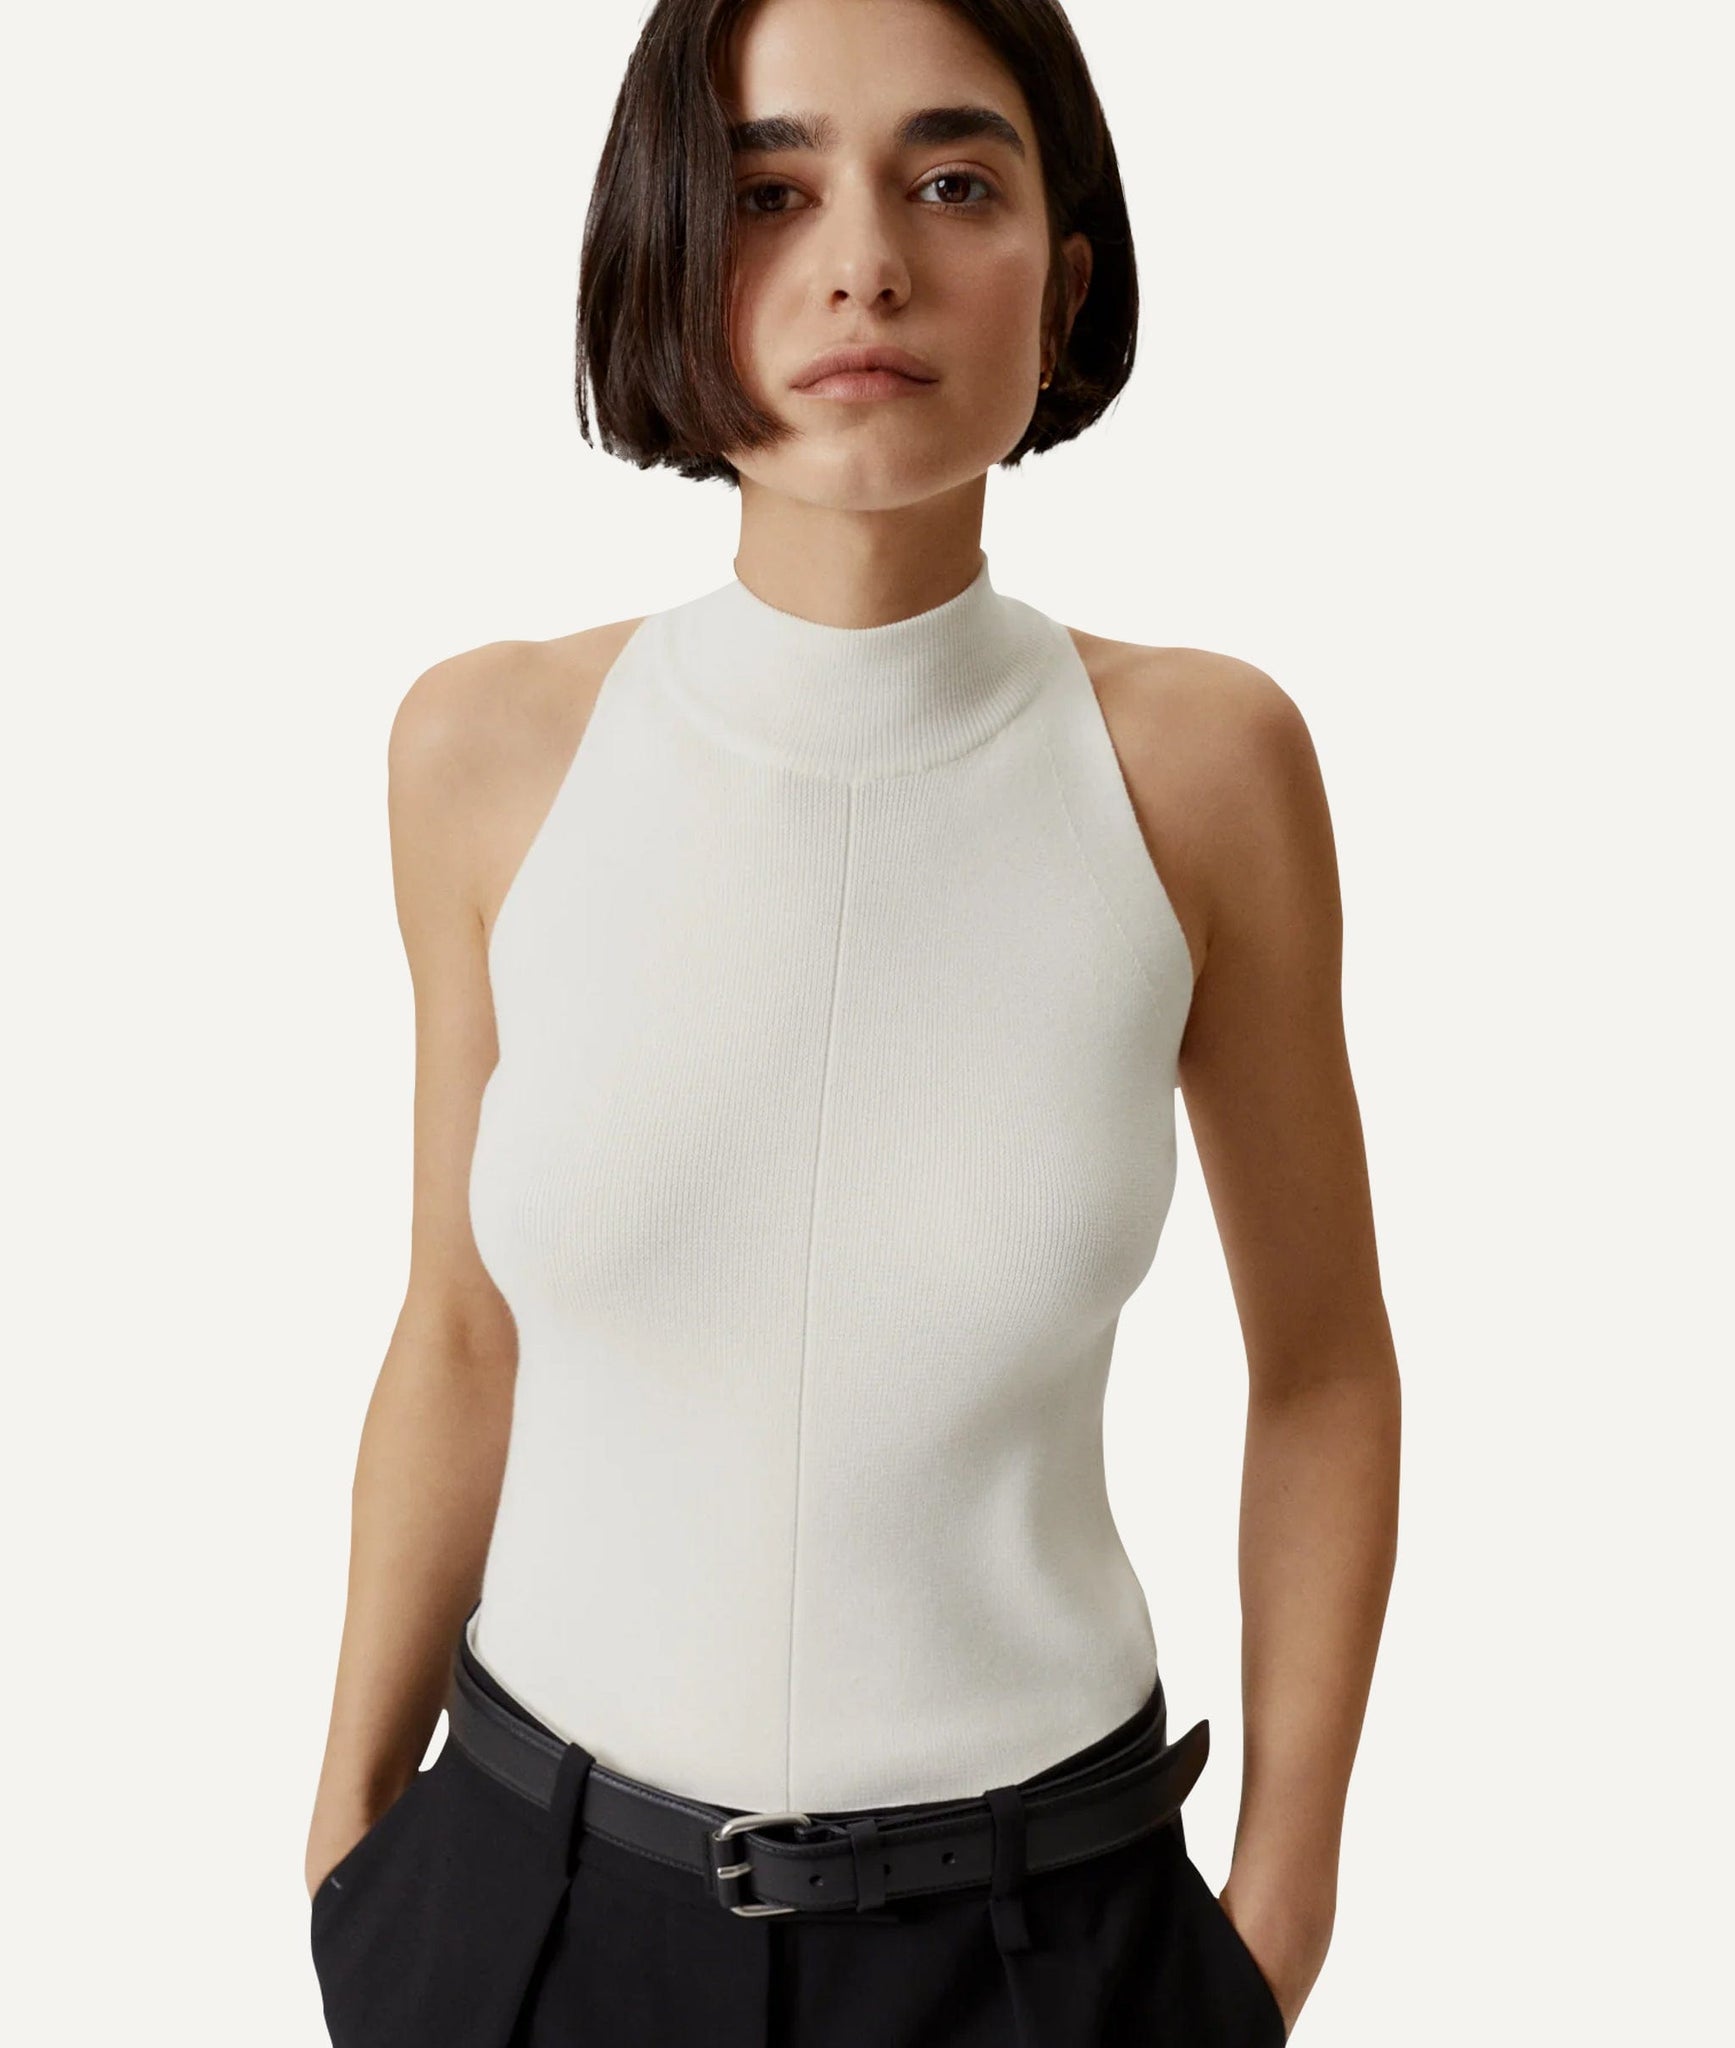 The Organic Cotton A-Line Top